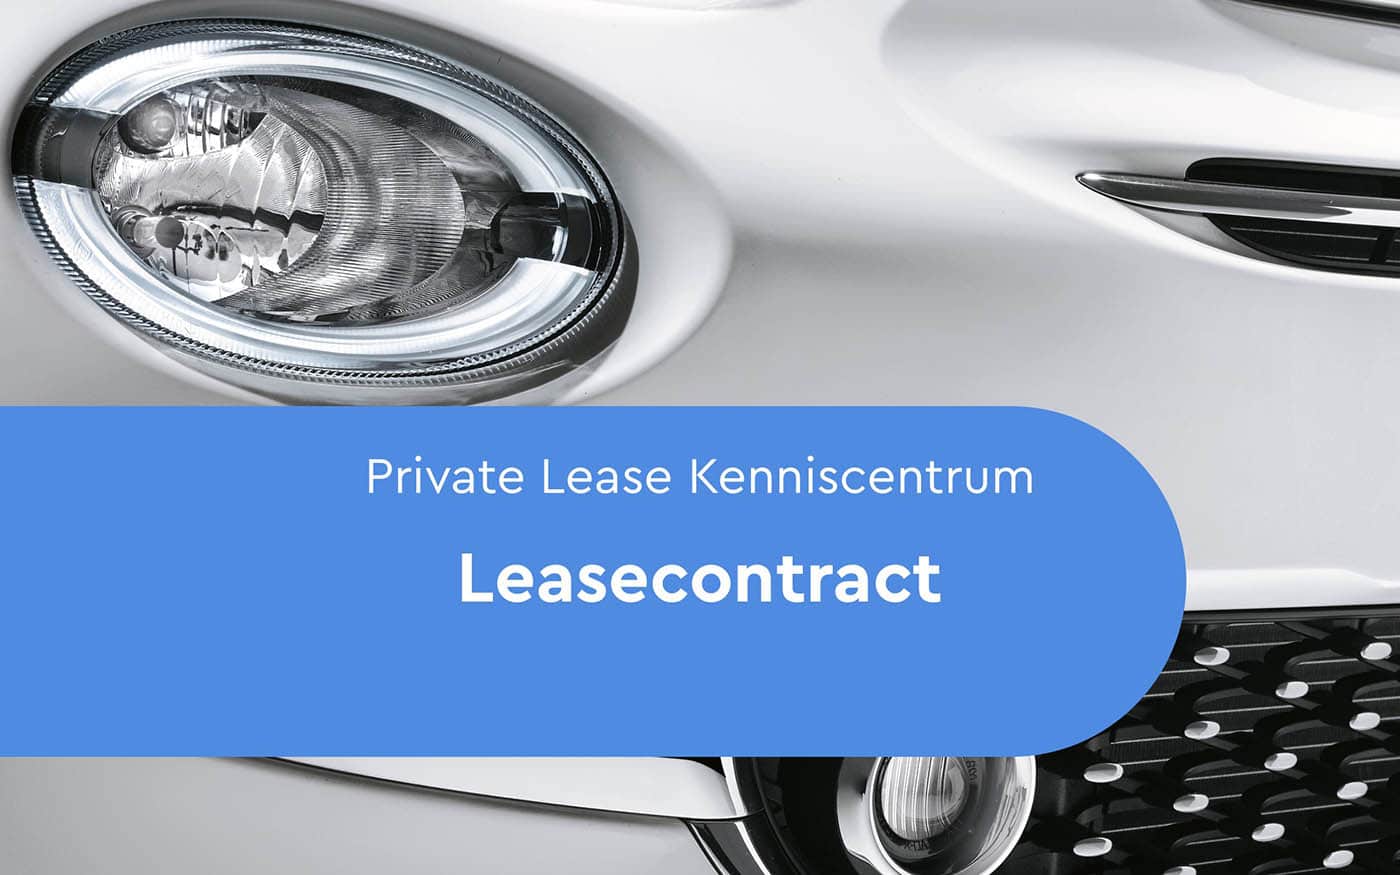 Leasecontract Private Lease